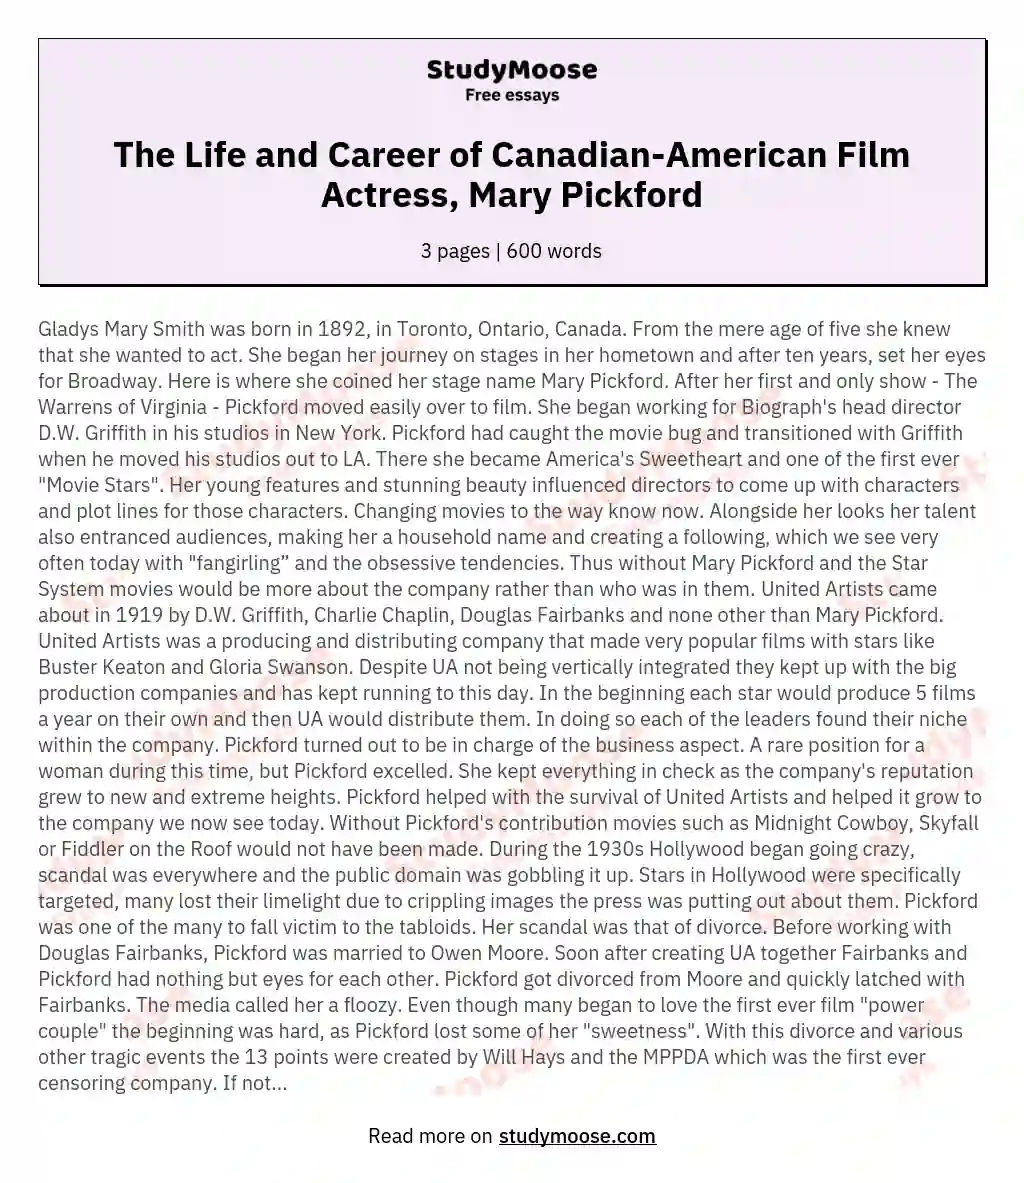 The Life and Career of Canadian-American Film Actress, Mary Pickford essay